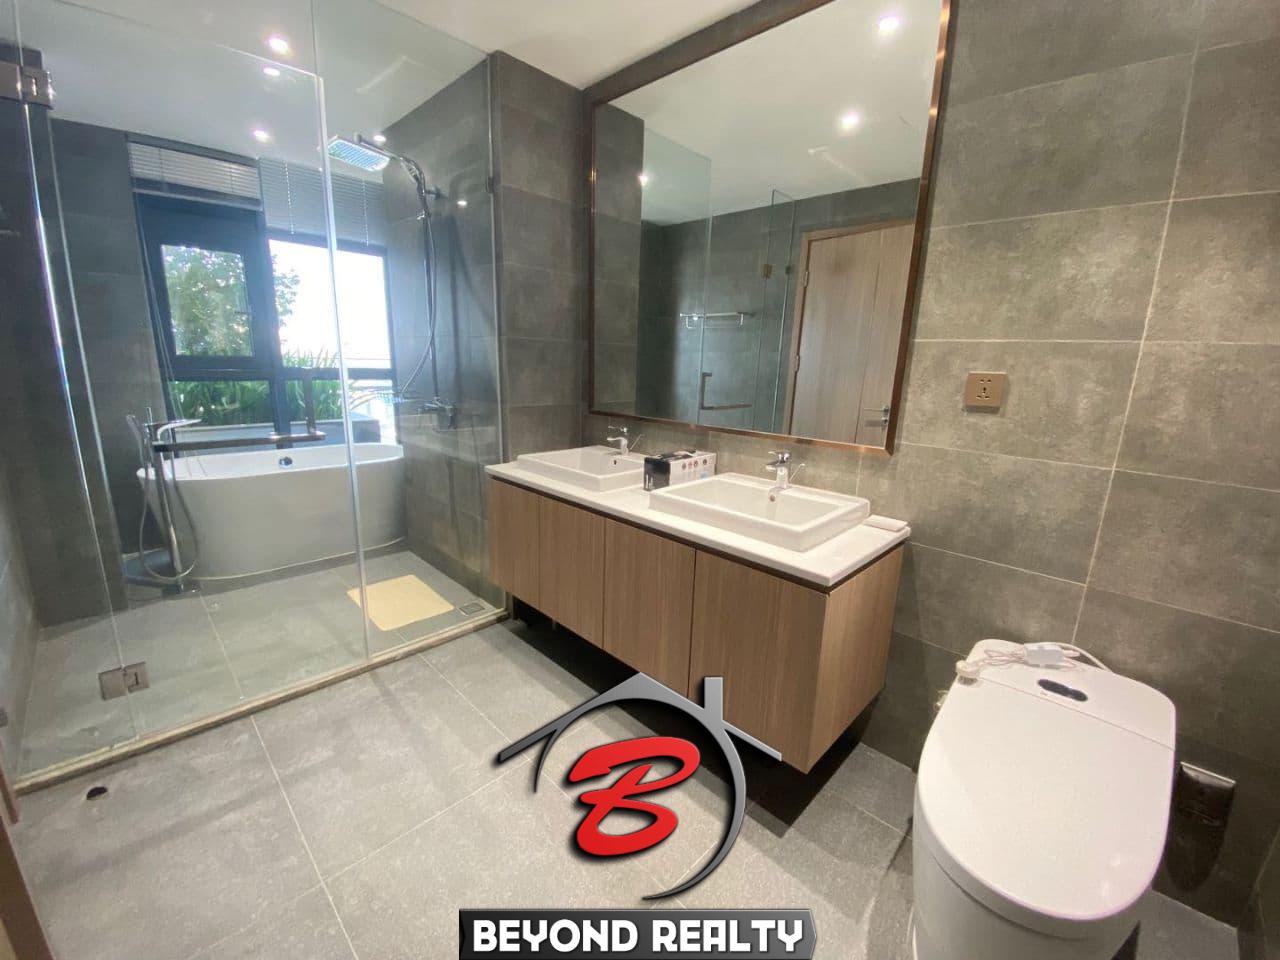 a bathroom of the 3-bedroom luxury spacious serviced flat for rent